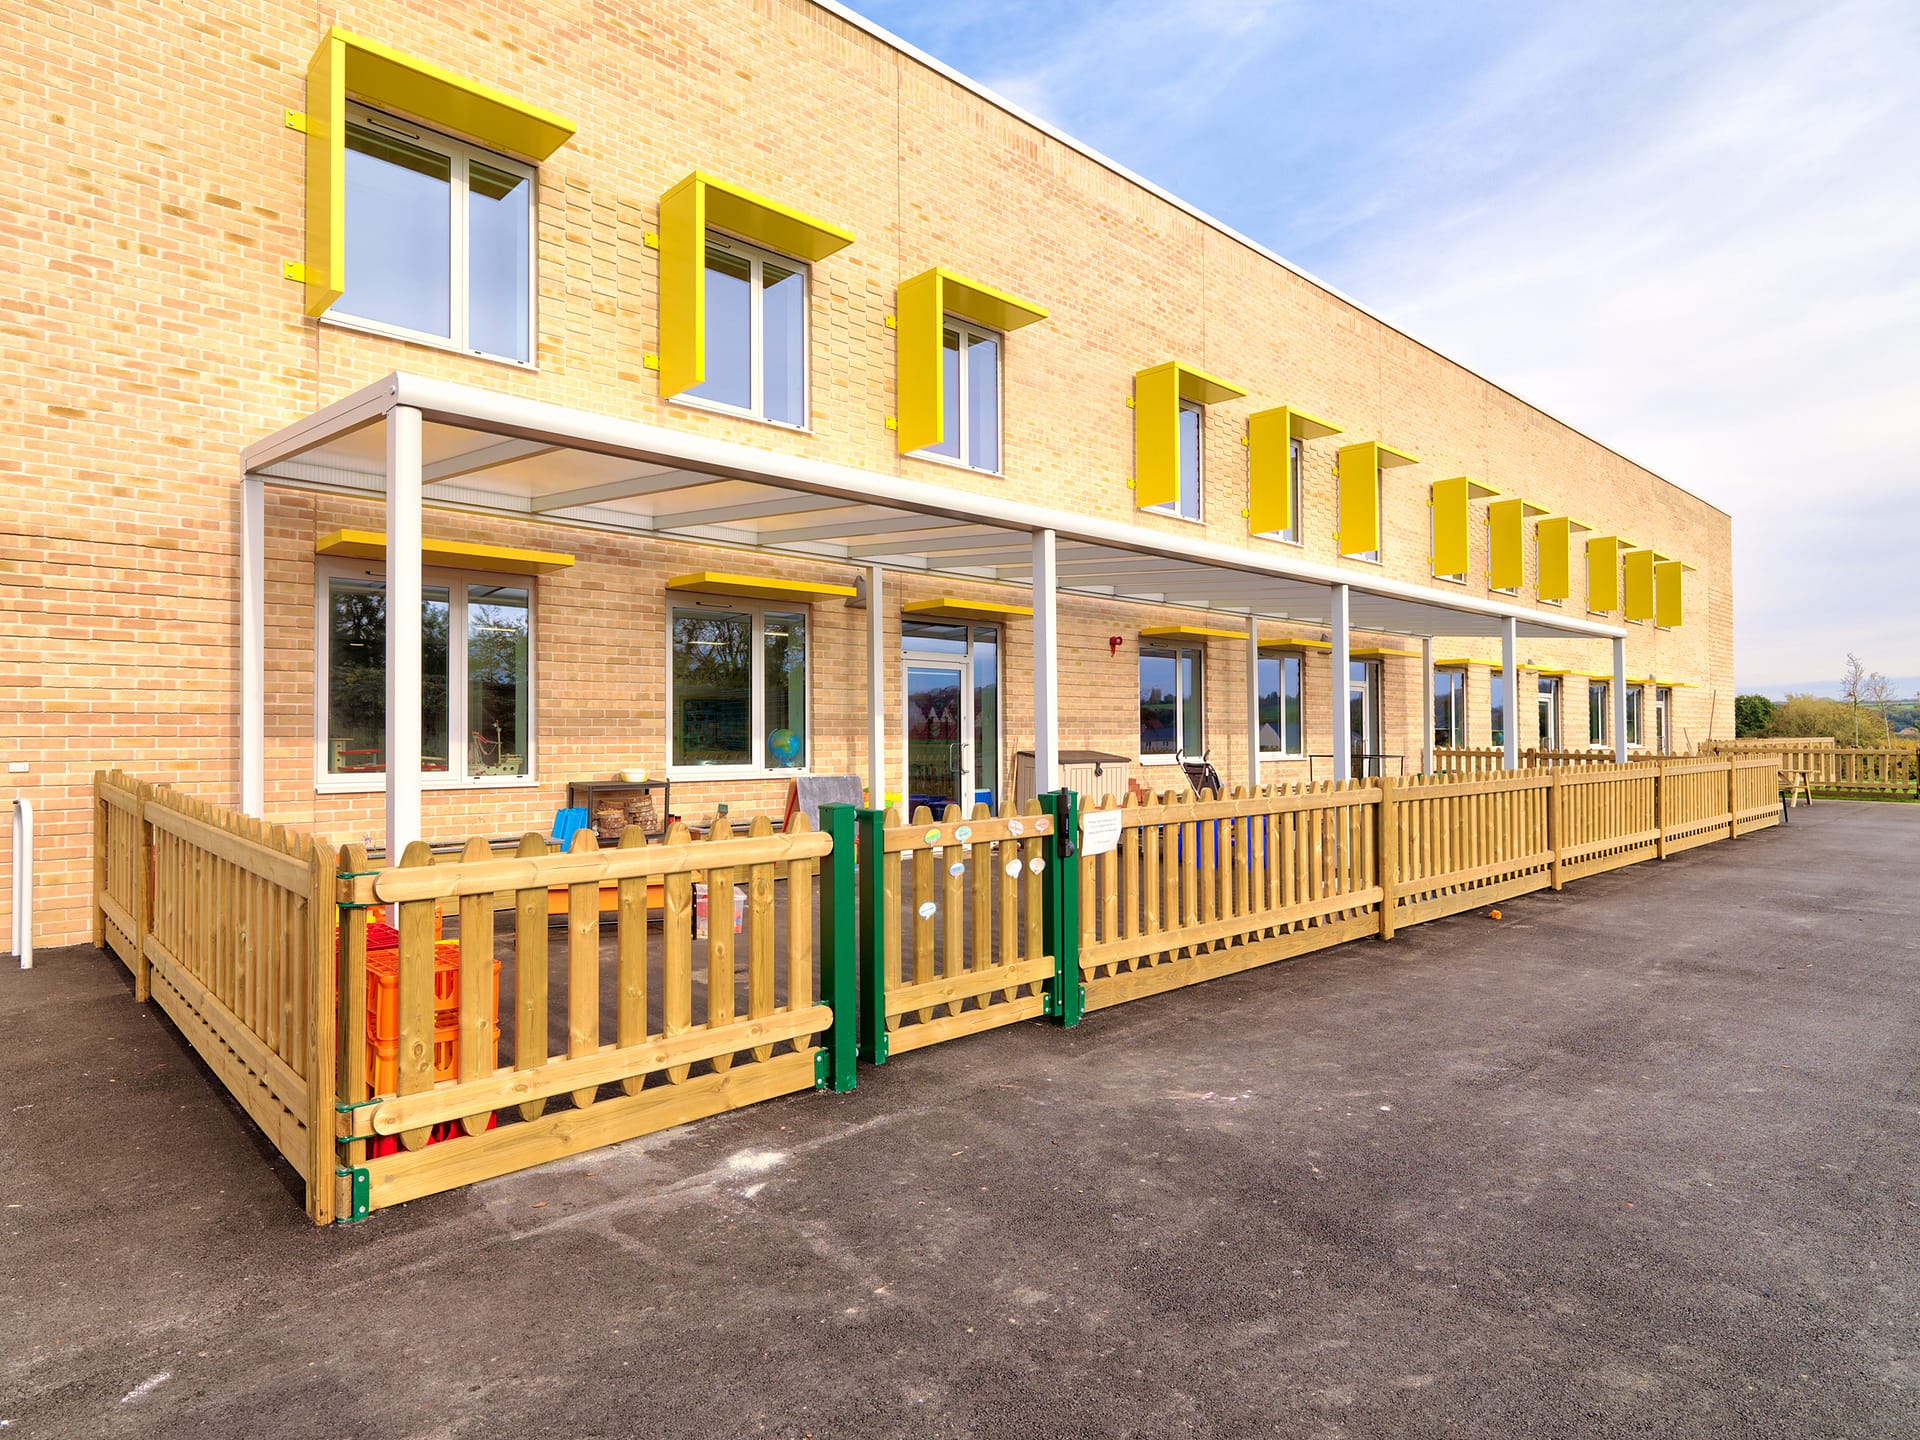 Lyde Green Primary School, Bristol - Covered learning